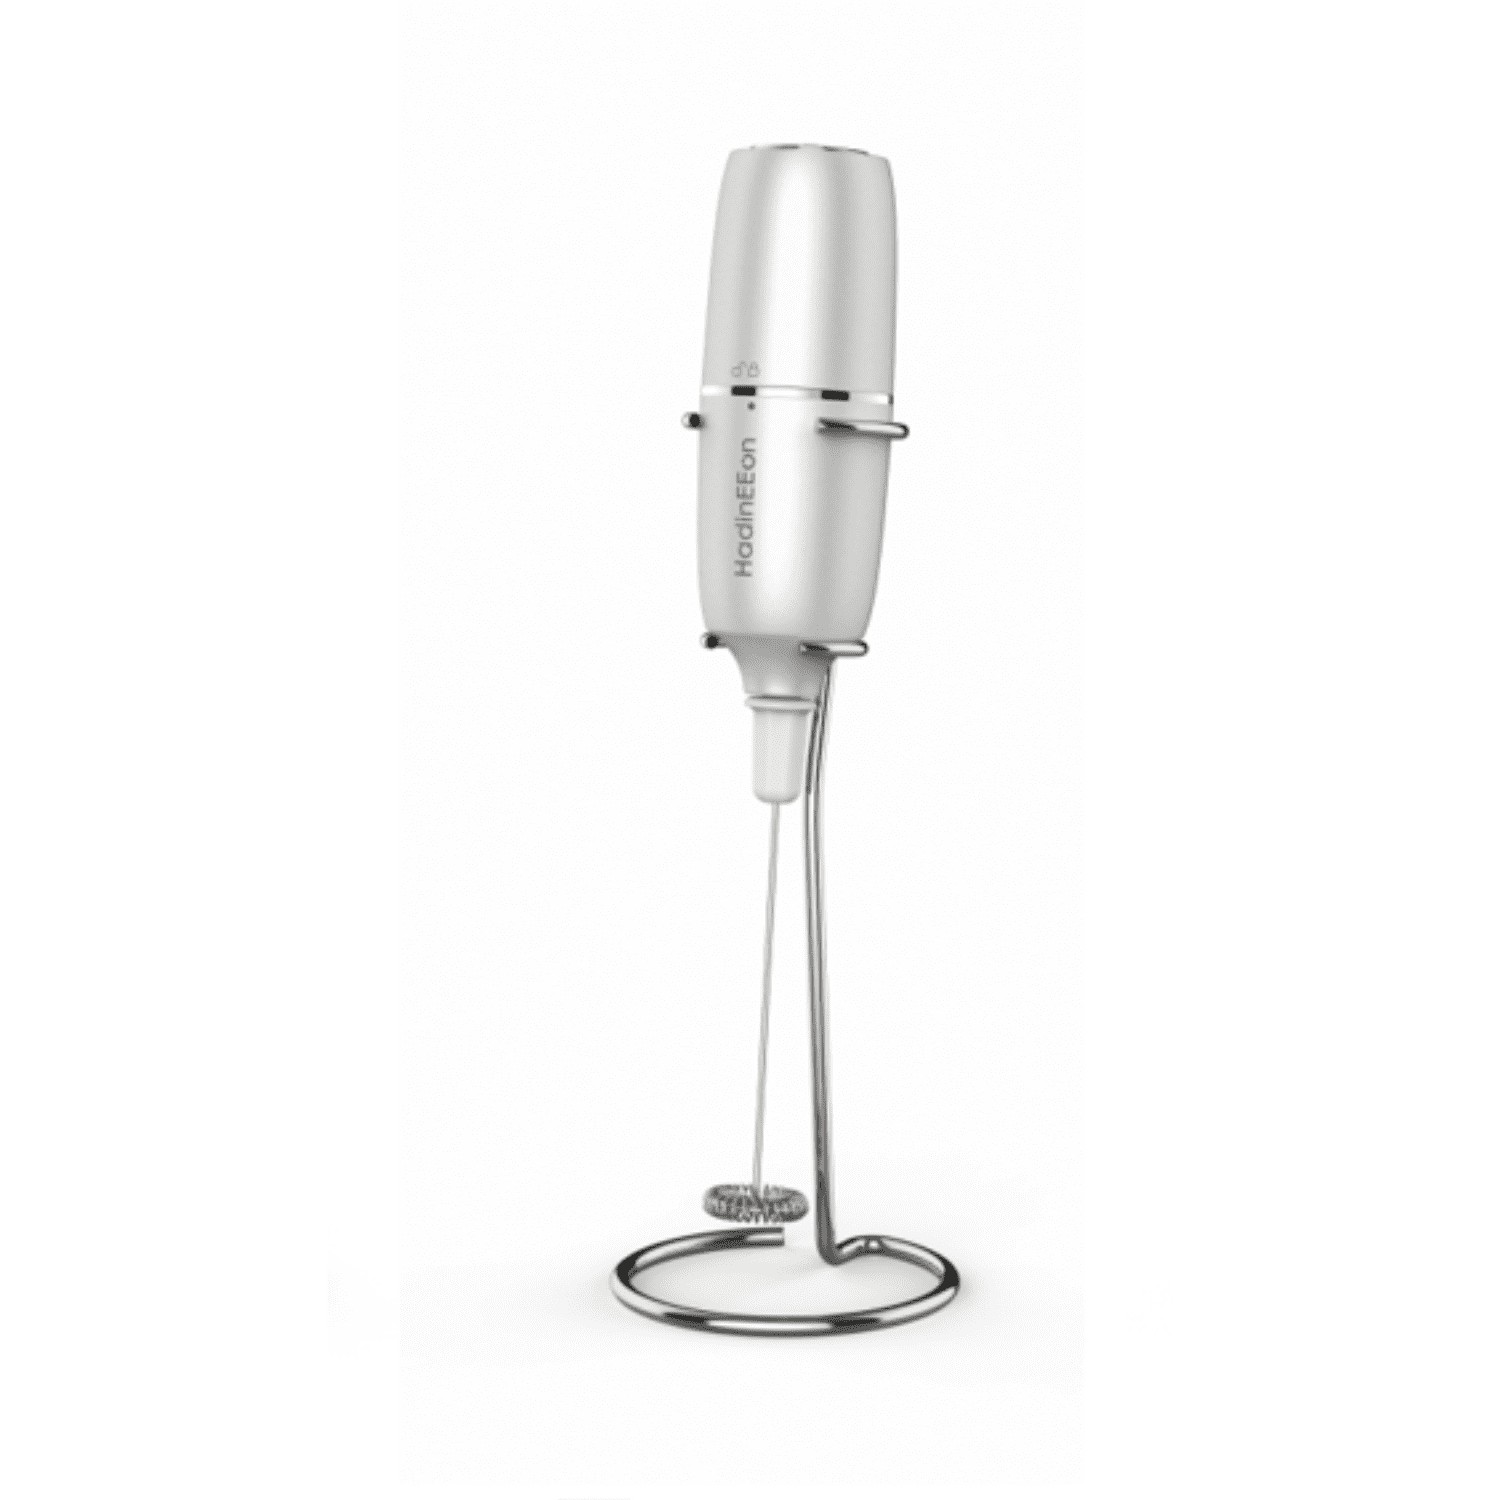 Qucoqpe Electric Milk Frother, Handheld Battery Milk Foam Maker for Bulletproof Coffee, Matcha, Hot Chocolate Stainless Steel Whisk Battery Operated